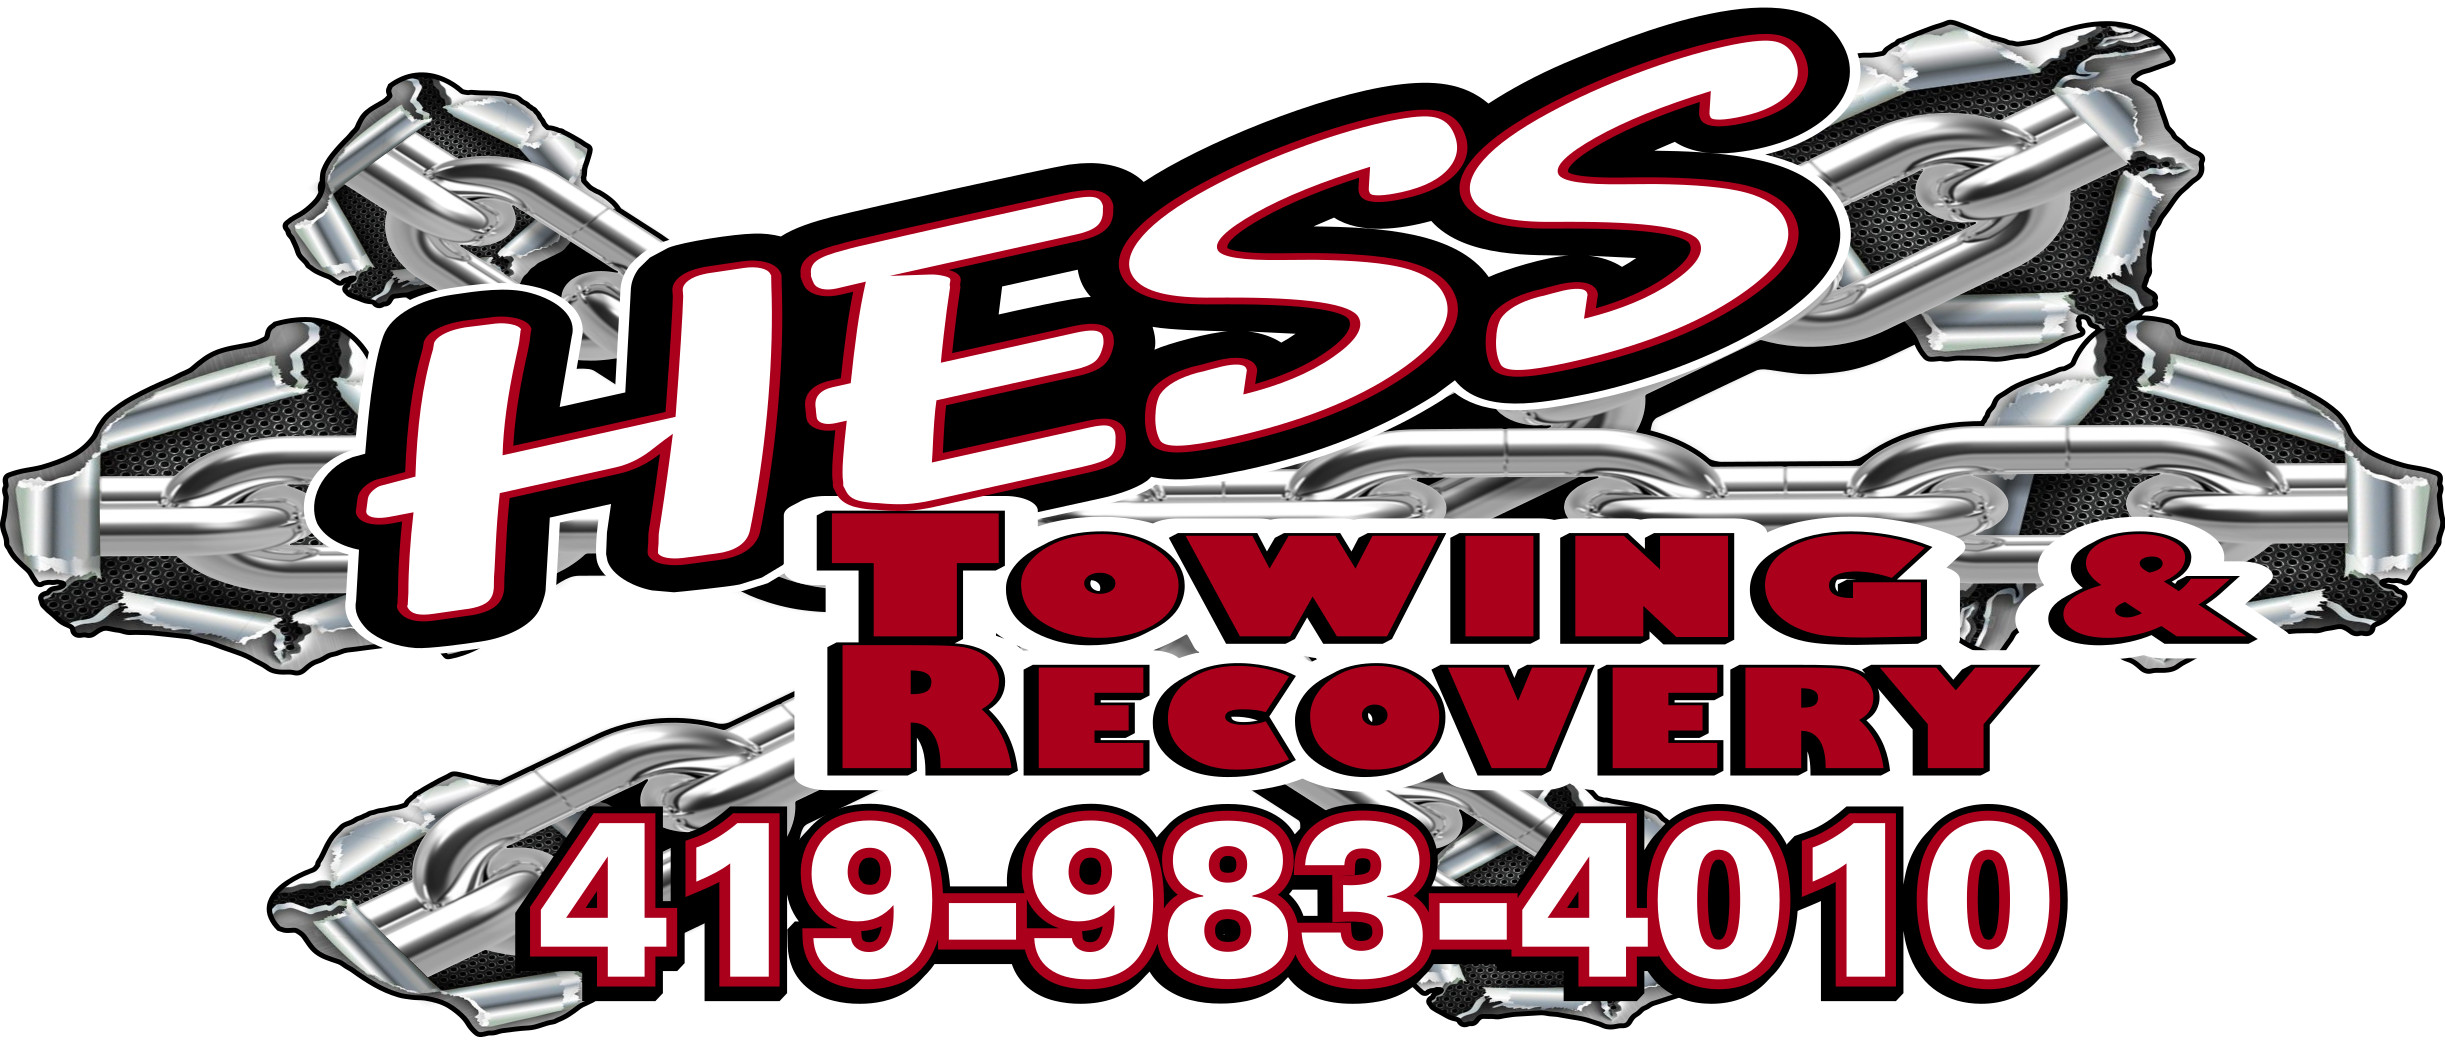 Hess Towing